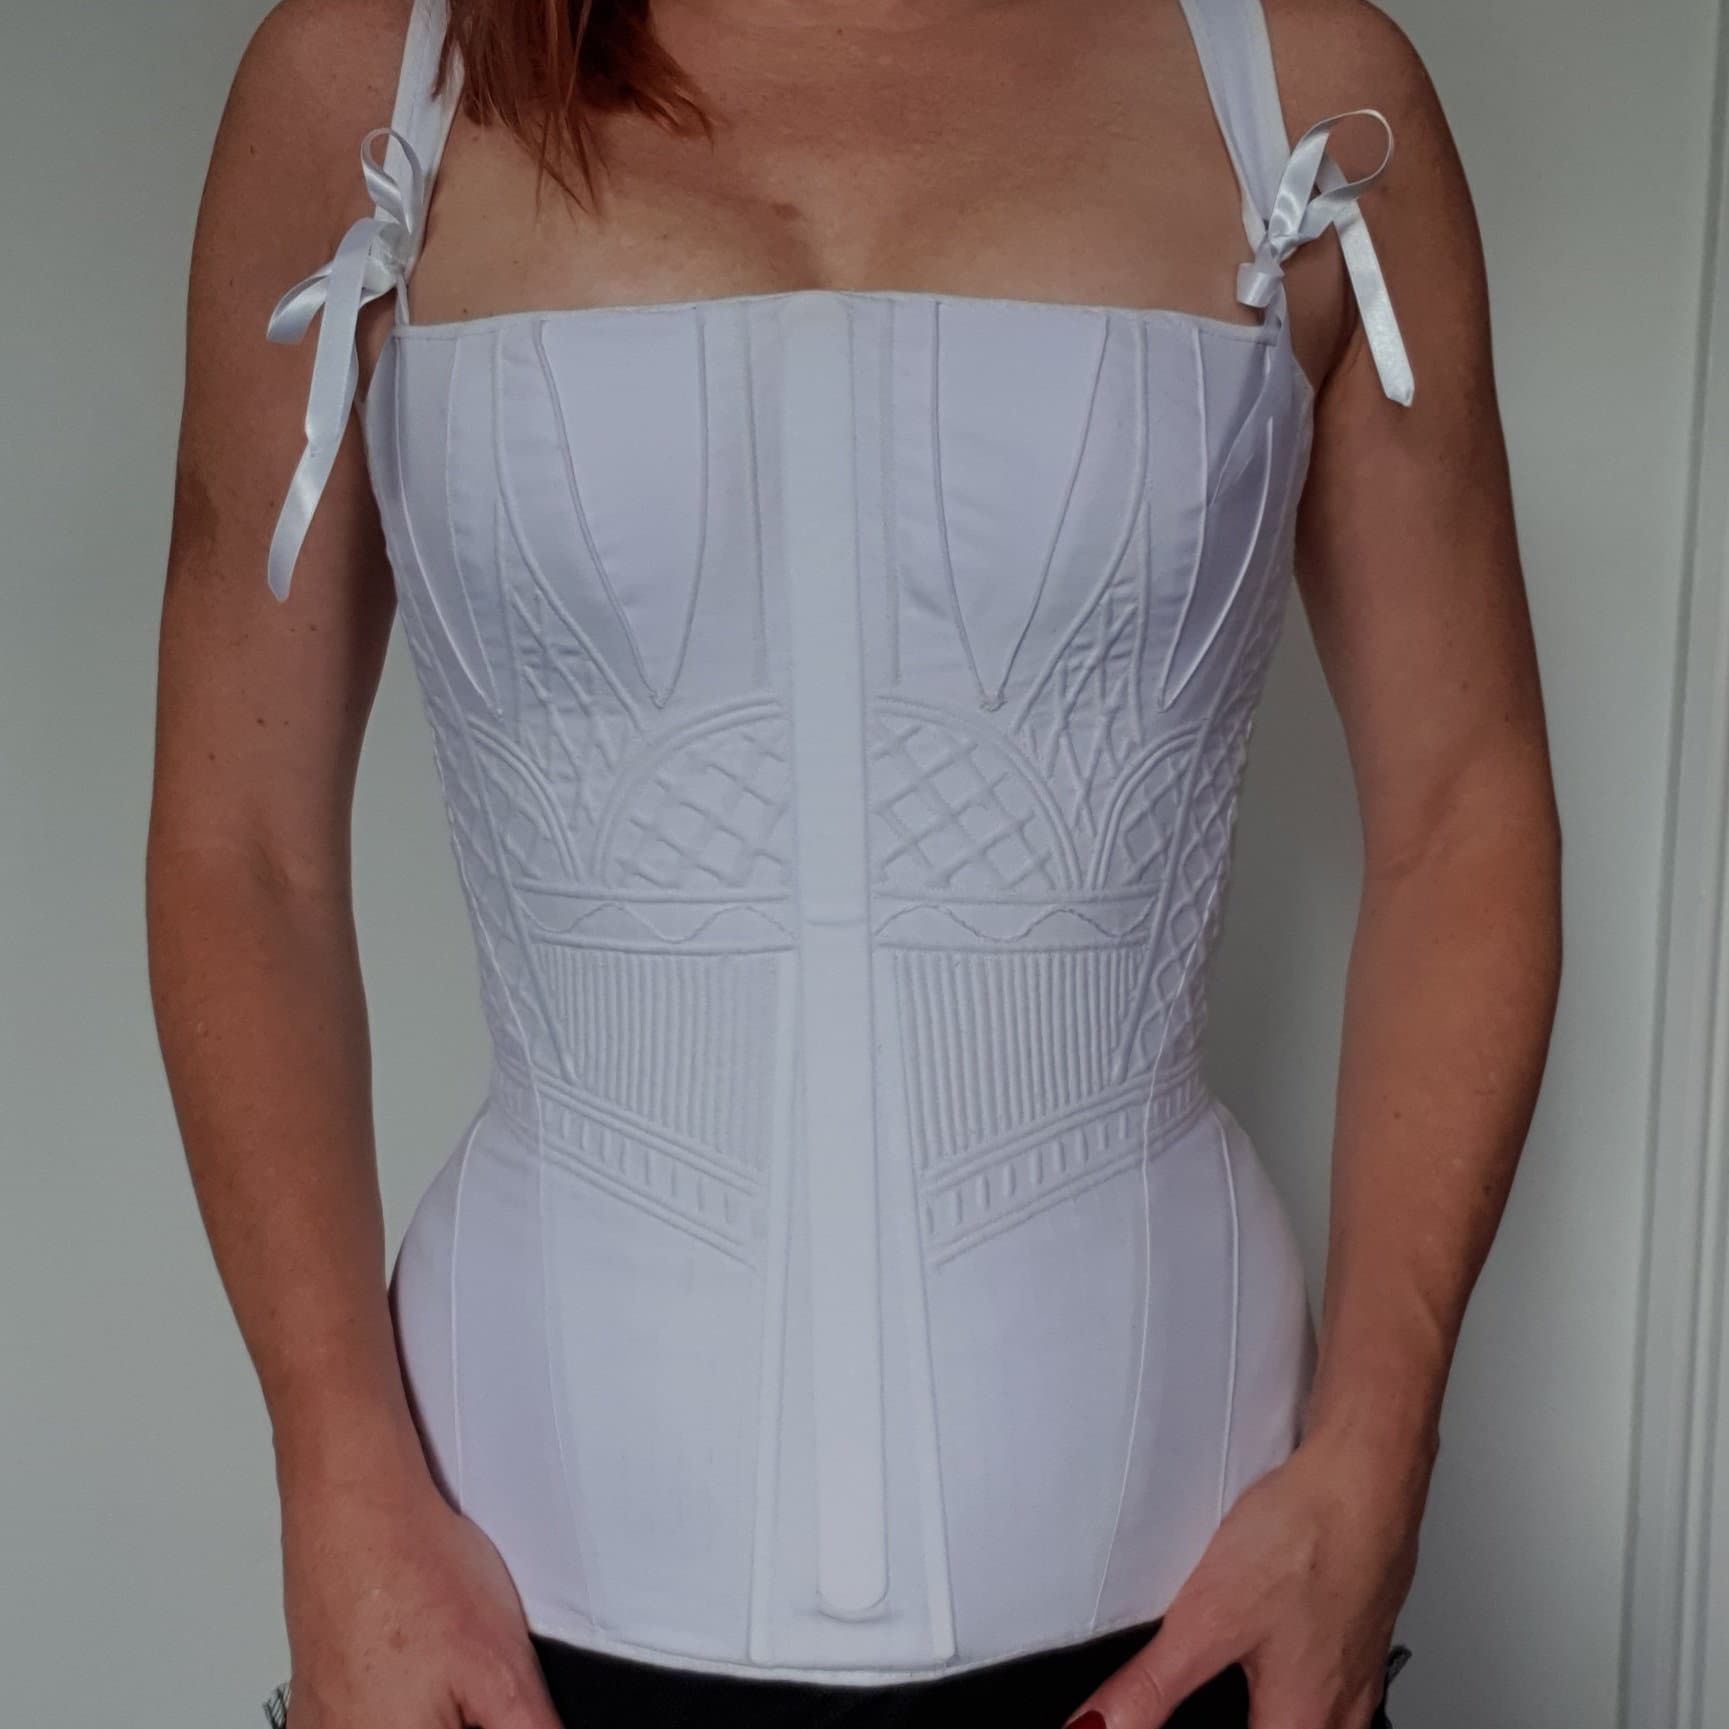 Corset Pattern Lydia an 1830's-inspired Corded Over-bust Corset